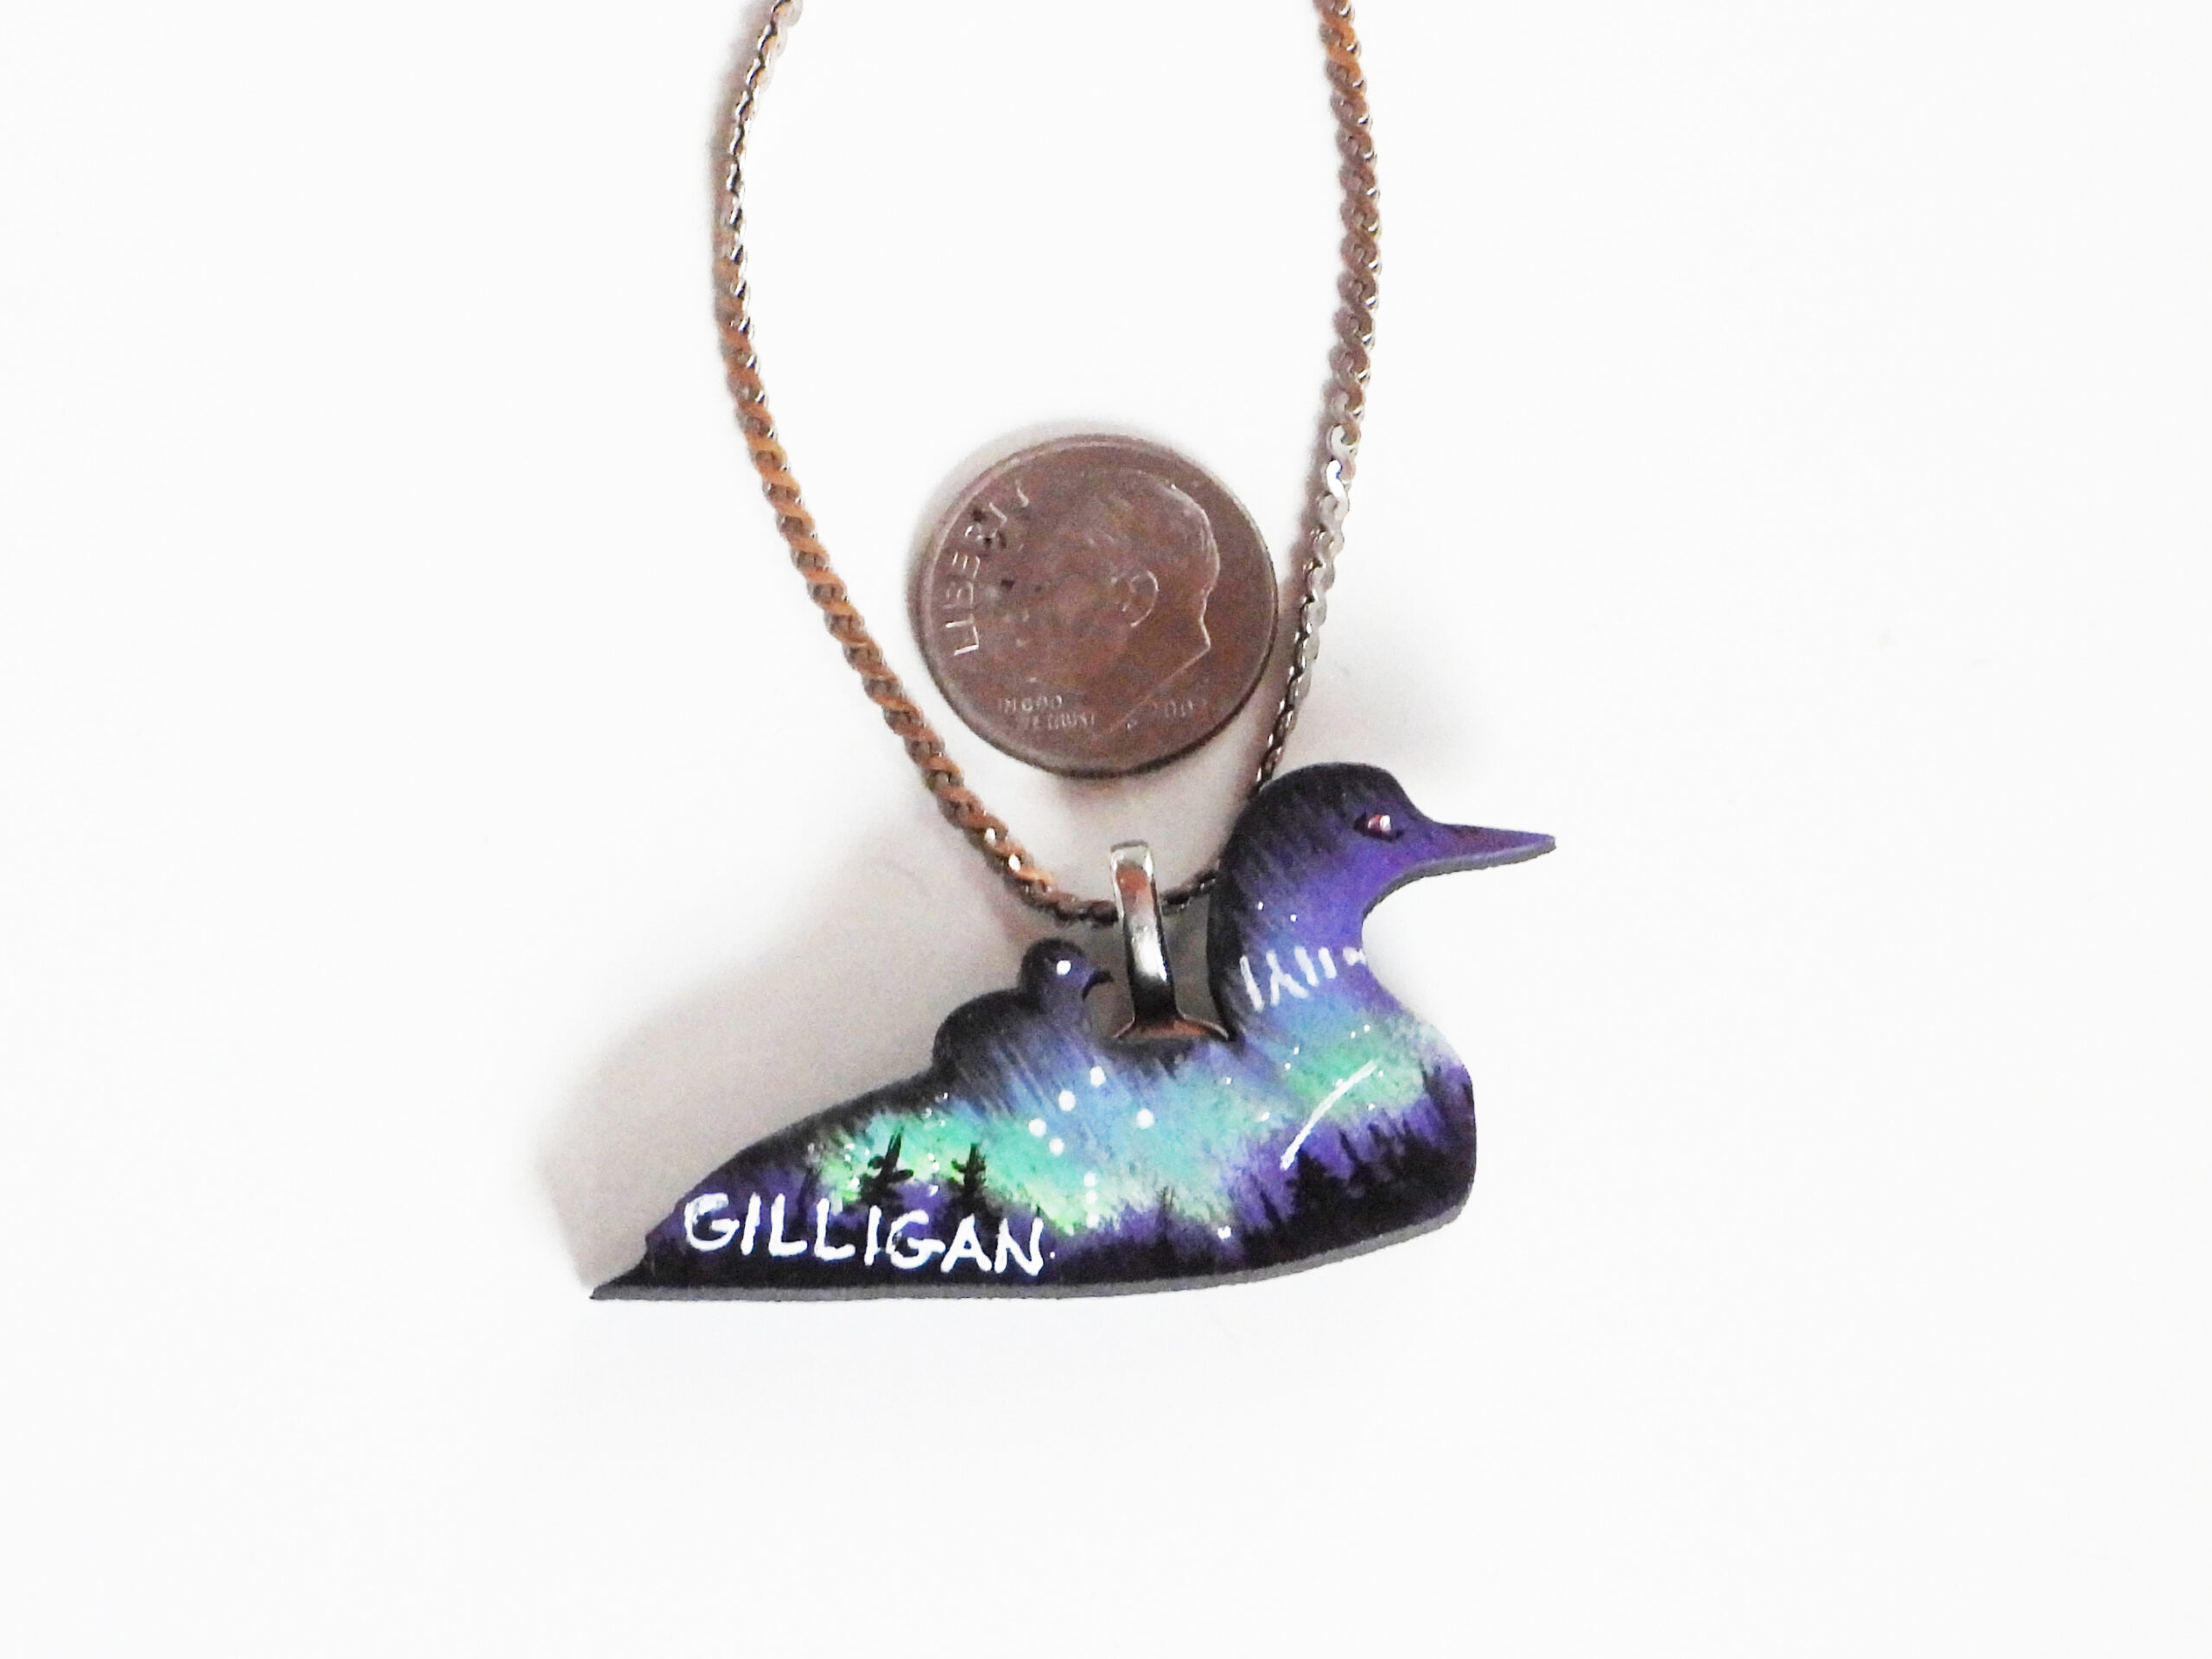 Little Loon Pendant or Magnet, Custom Painted to Your Preferences  $25 (6-8 week lead time)